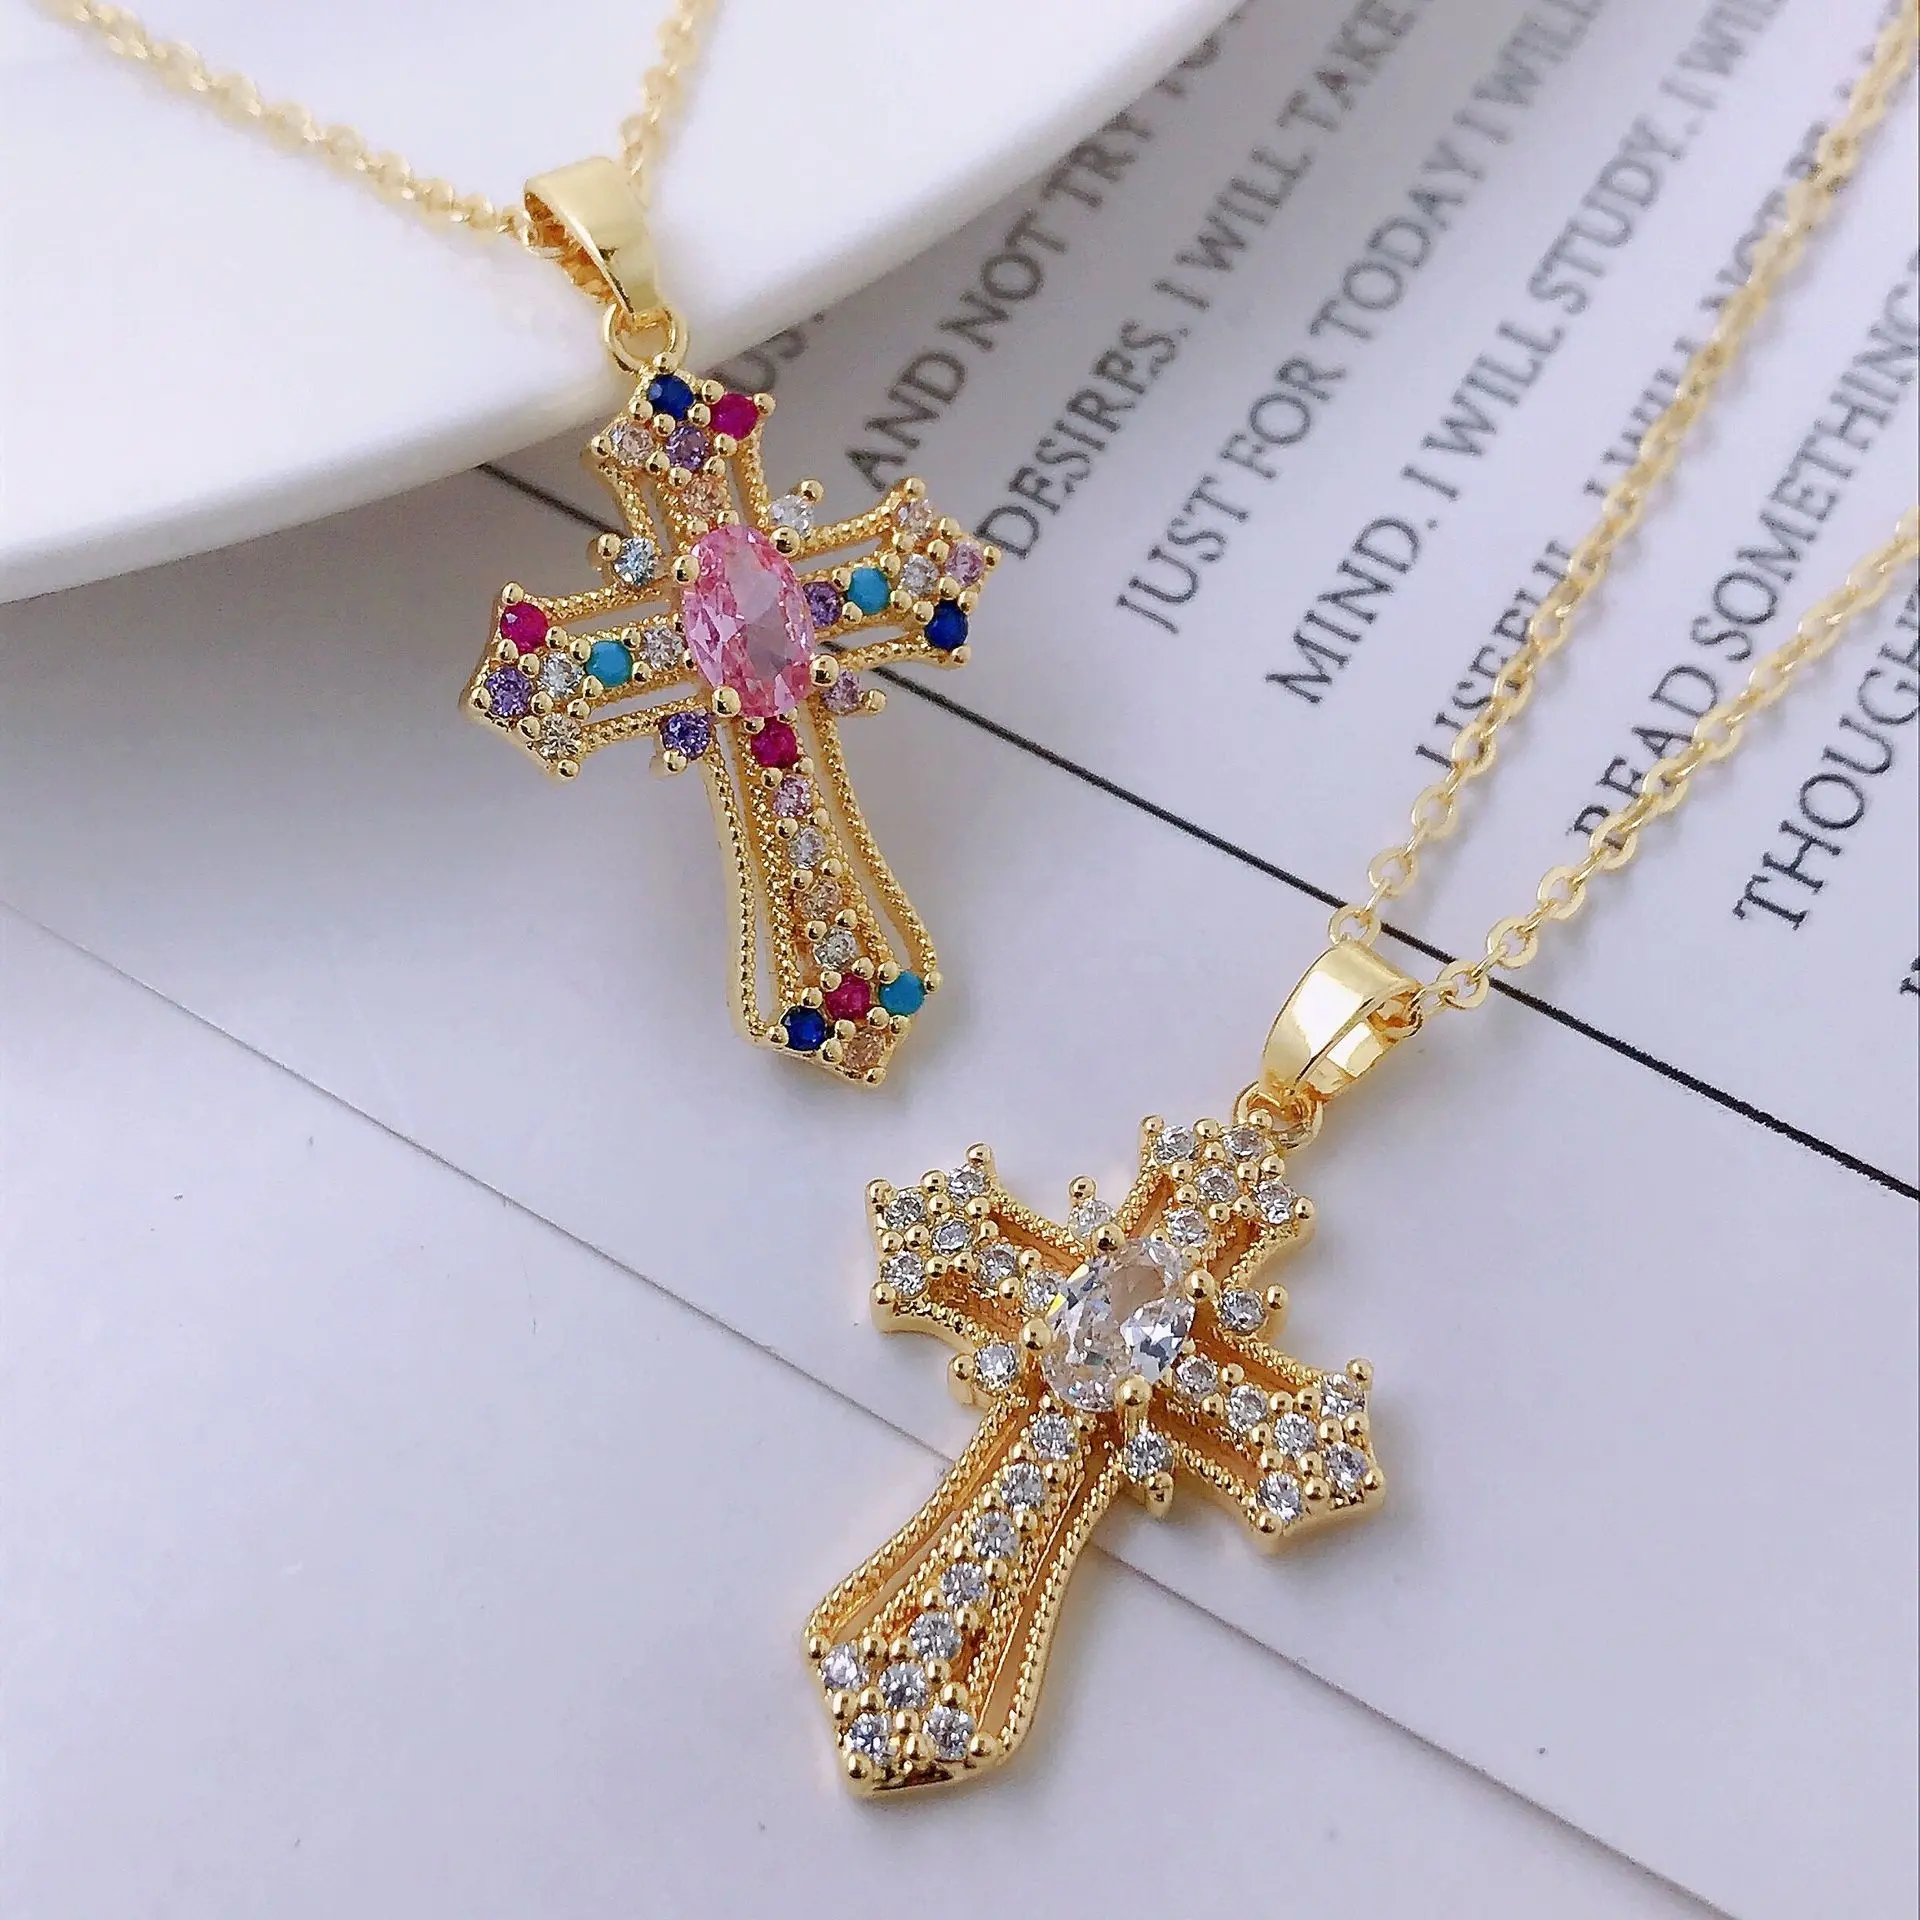 Christian Religion Cross Pendant 18K Gold Plated Stainless Steel Chain colorful CZ Micro Pave jesus necklace